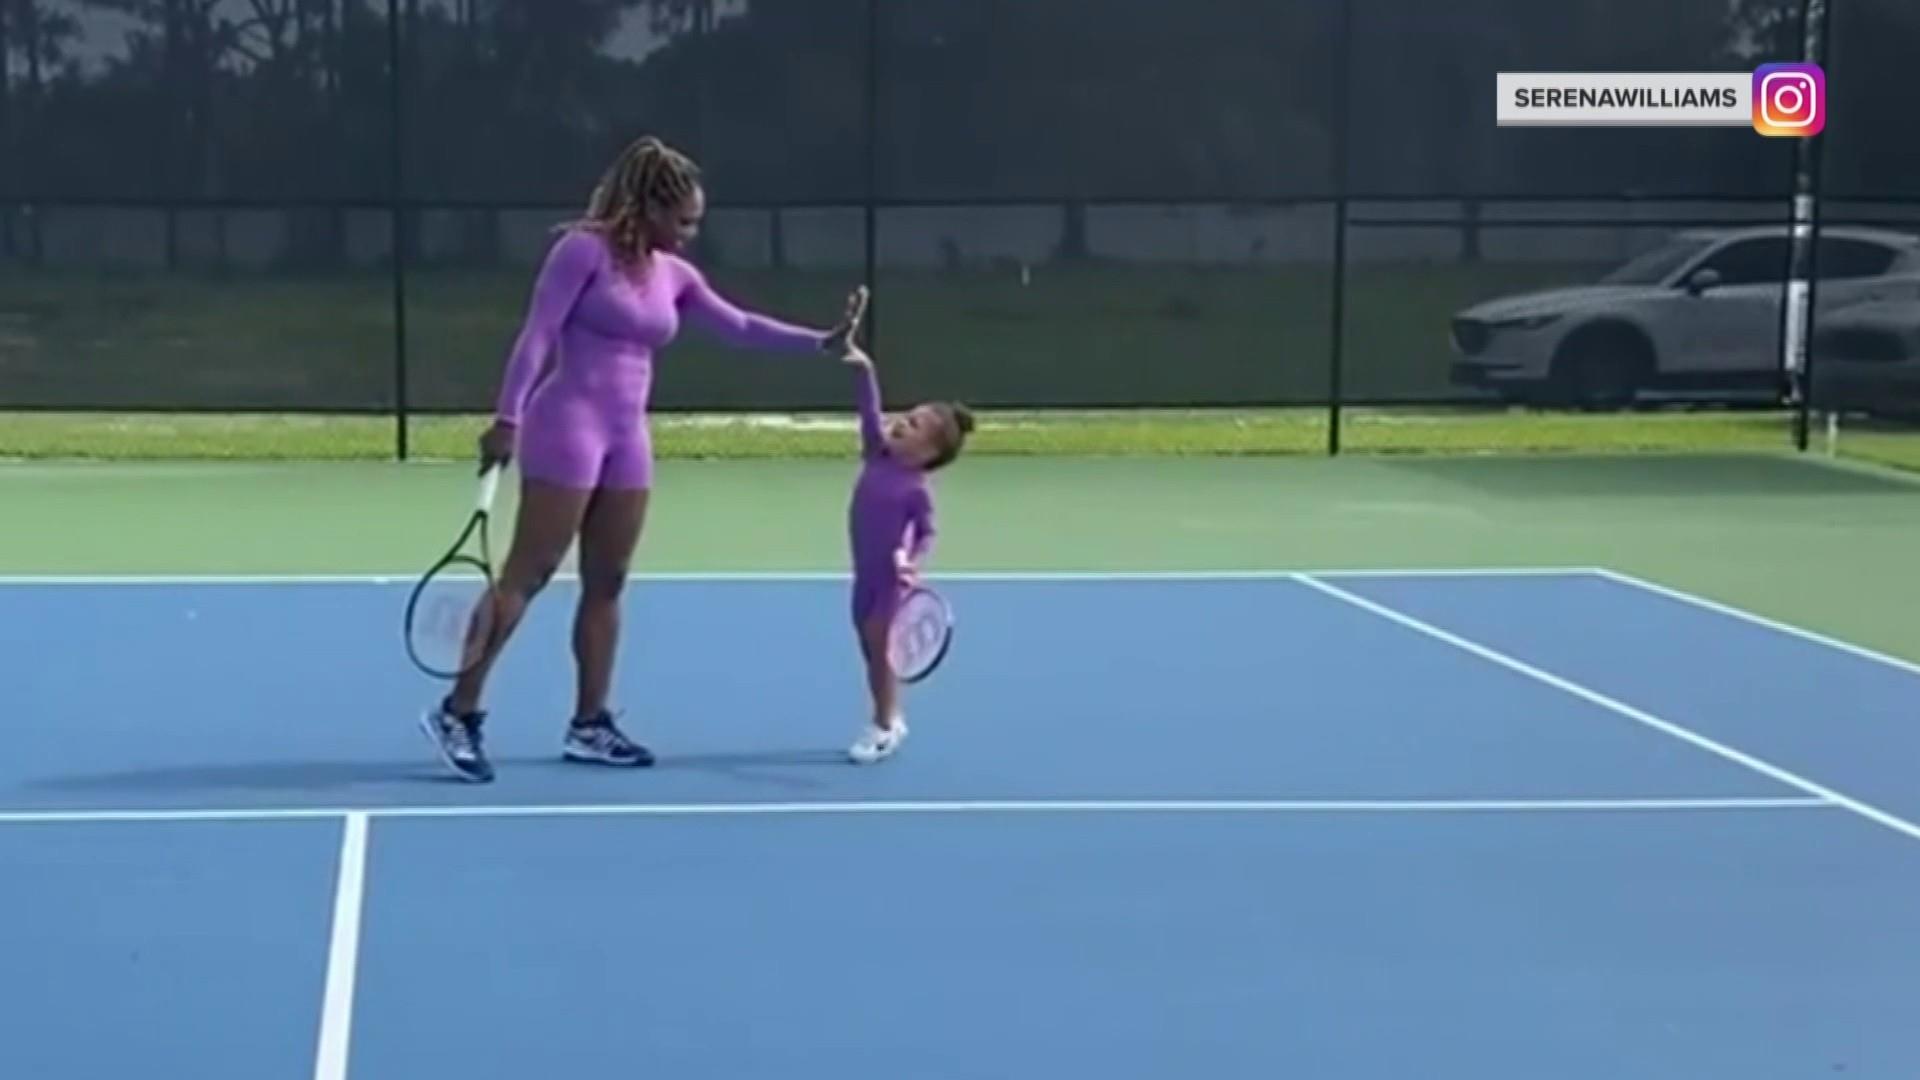 Williams' 2-year-old daughter tennis court with her mom